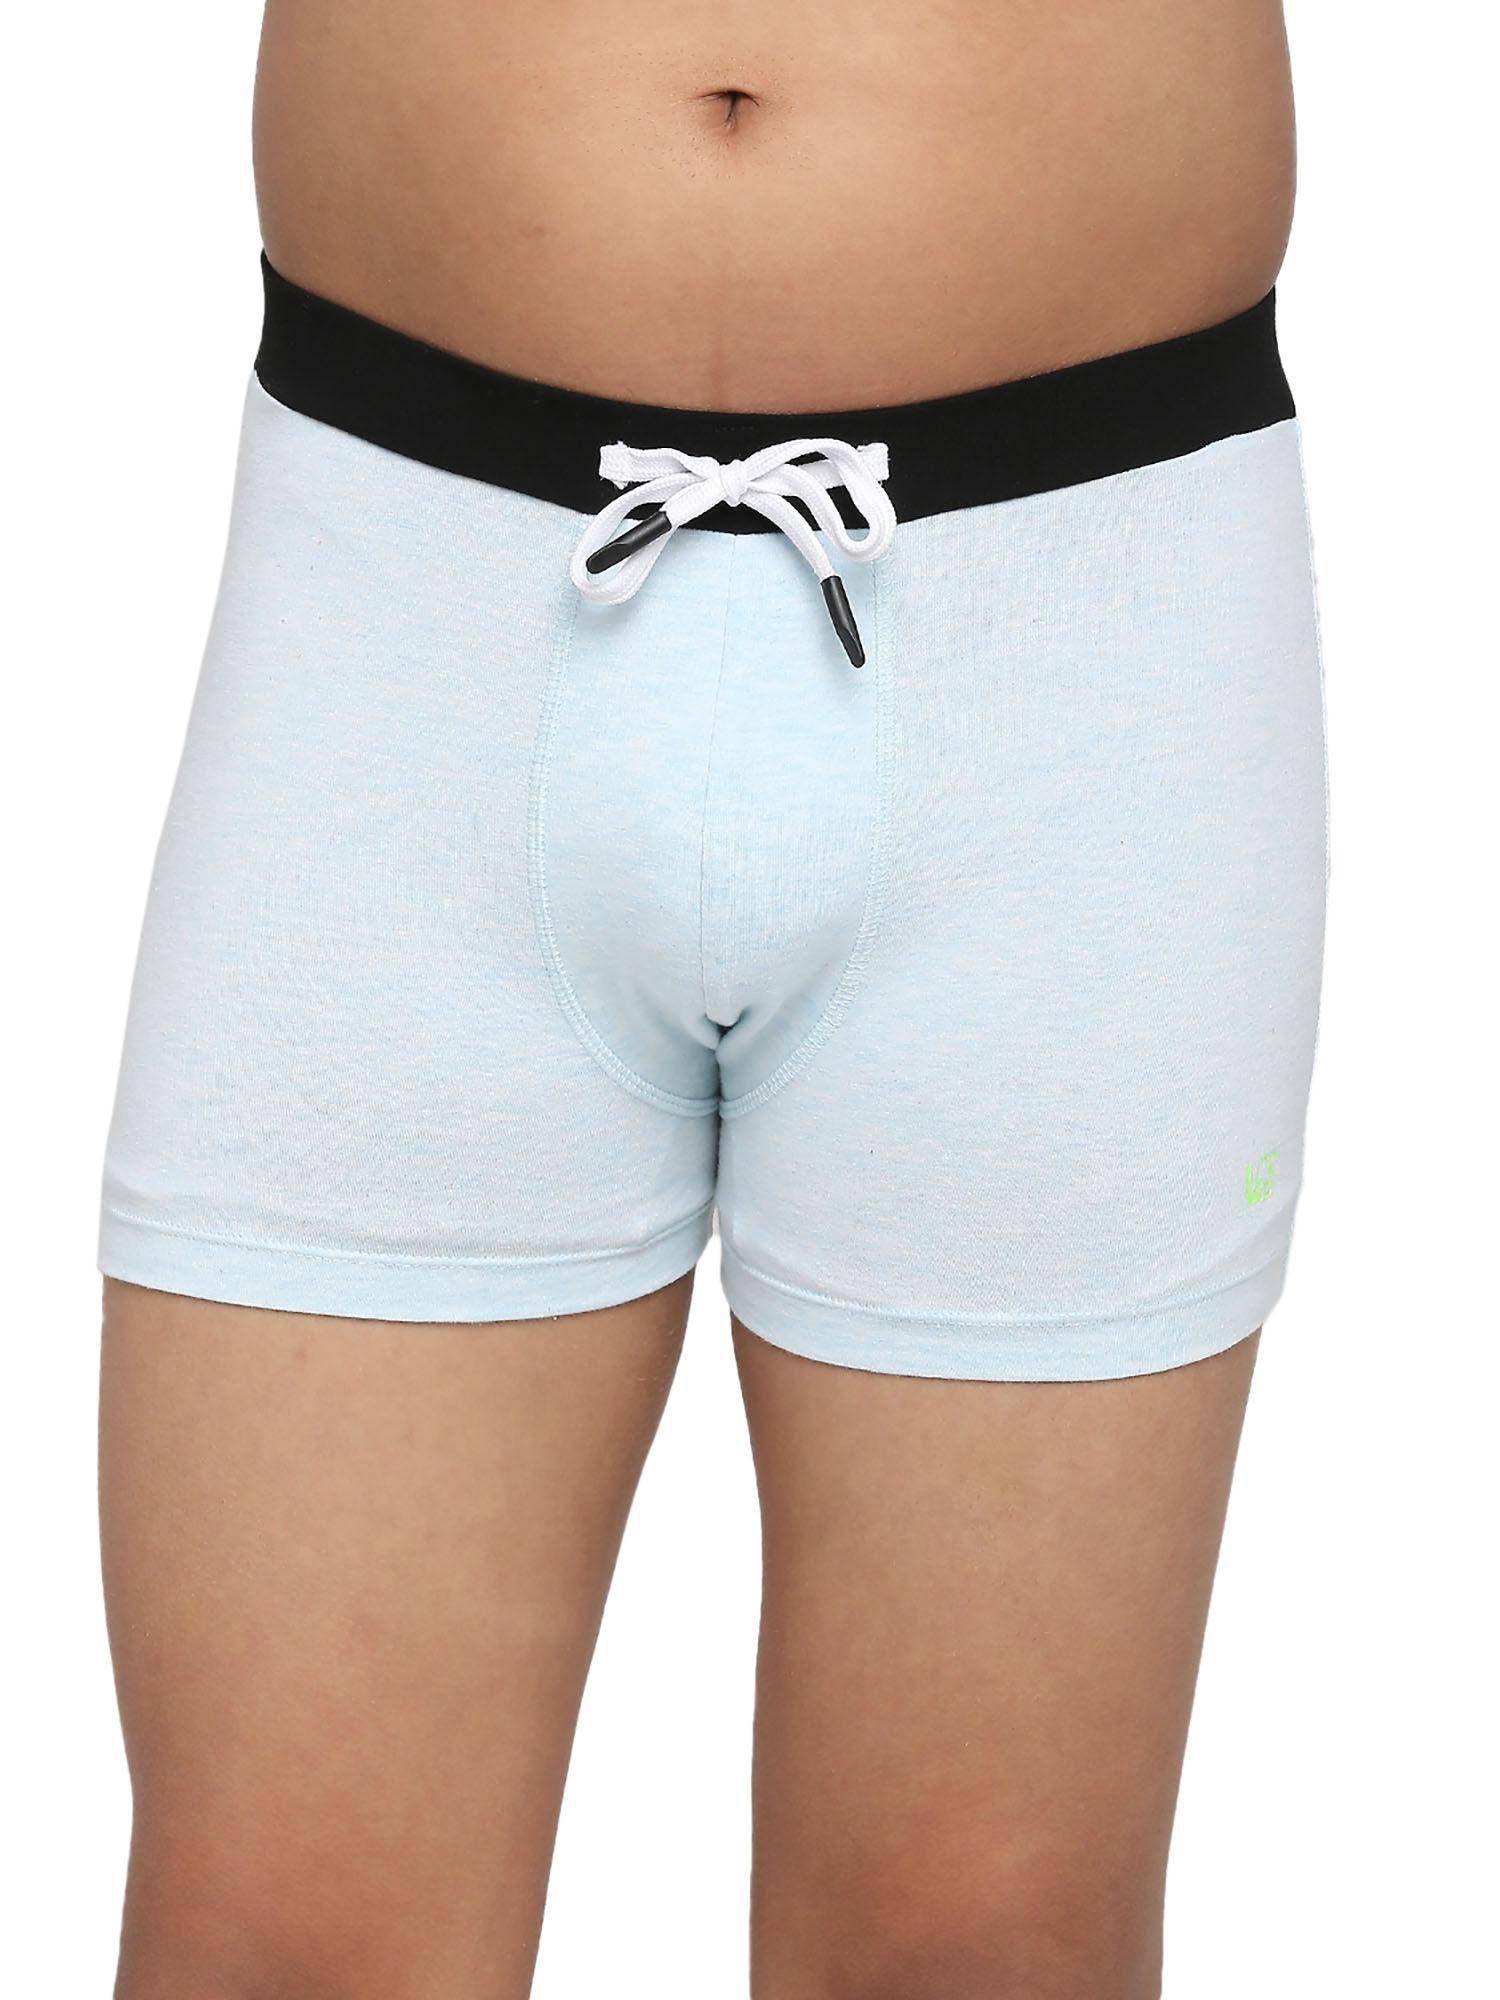 teenagers-cotton-trunk-dark-grey-and-aqua-(pack-of-2)